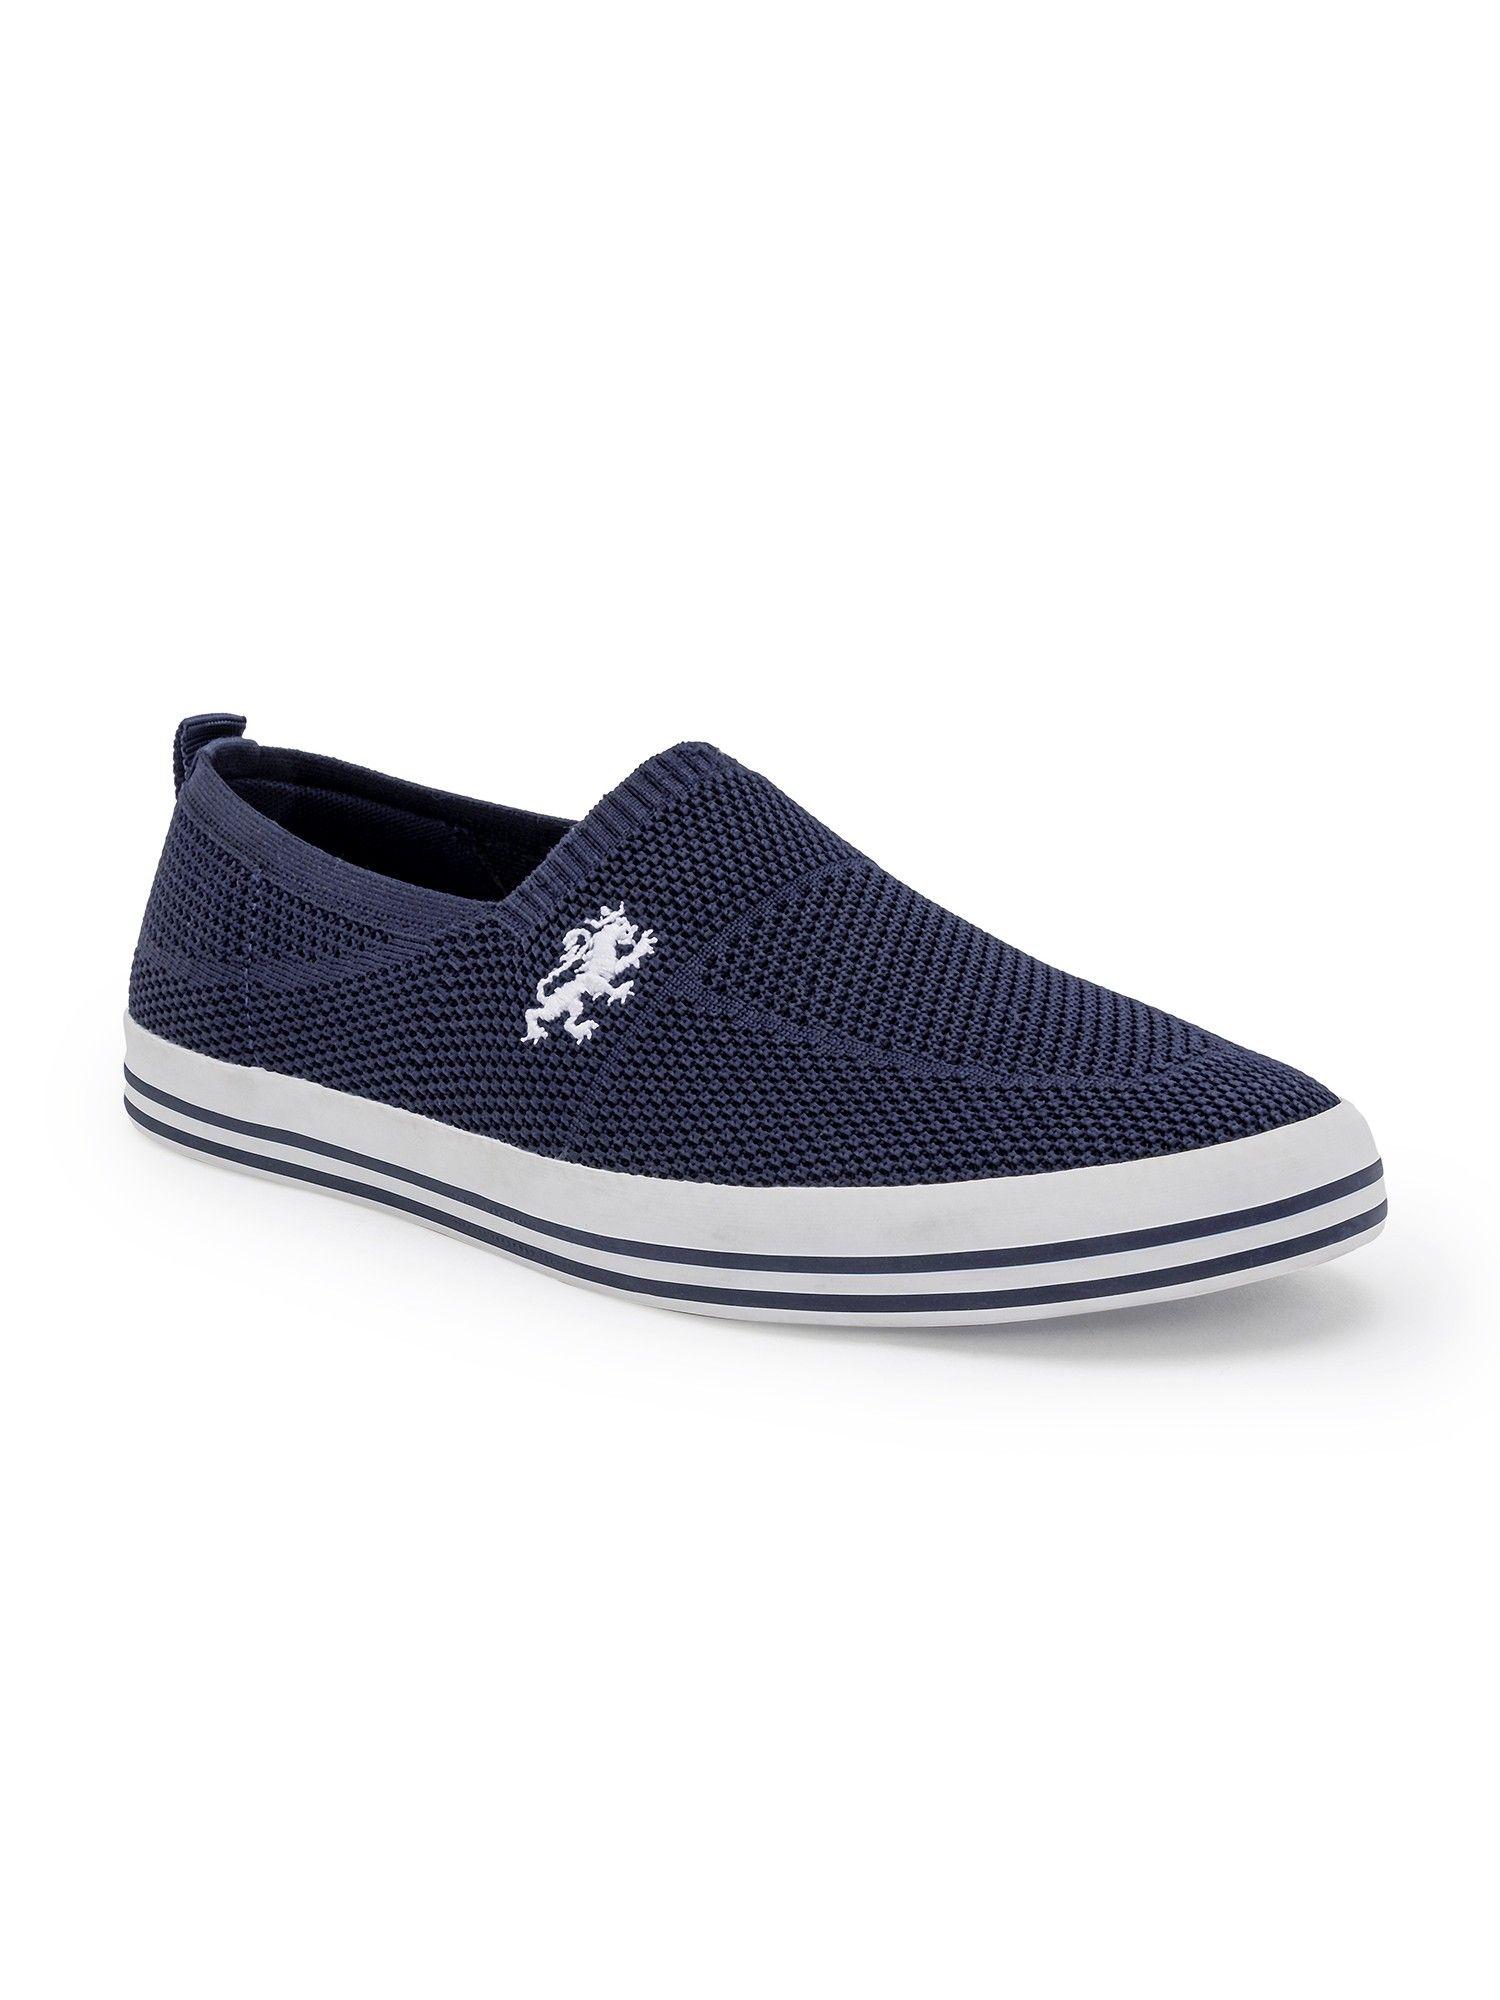 mens navy blue casual sneakers shoes